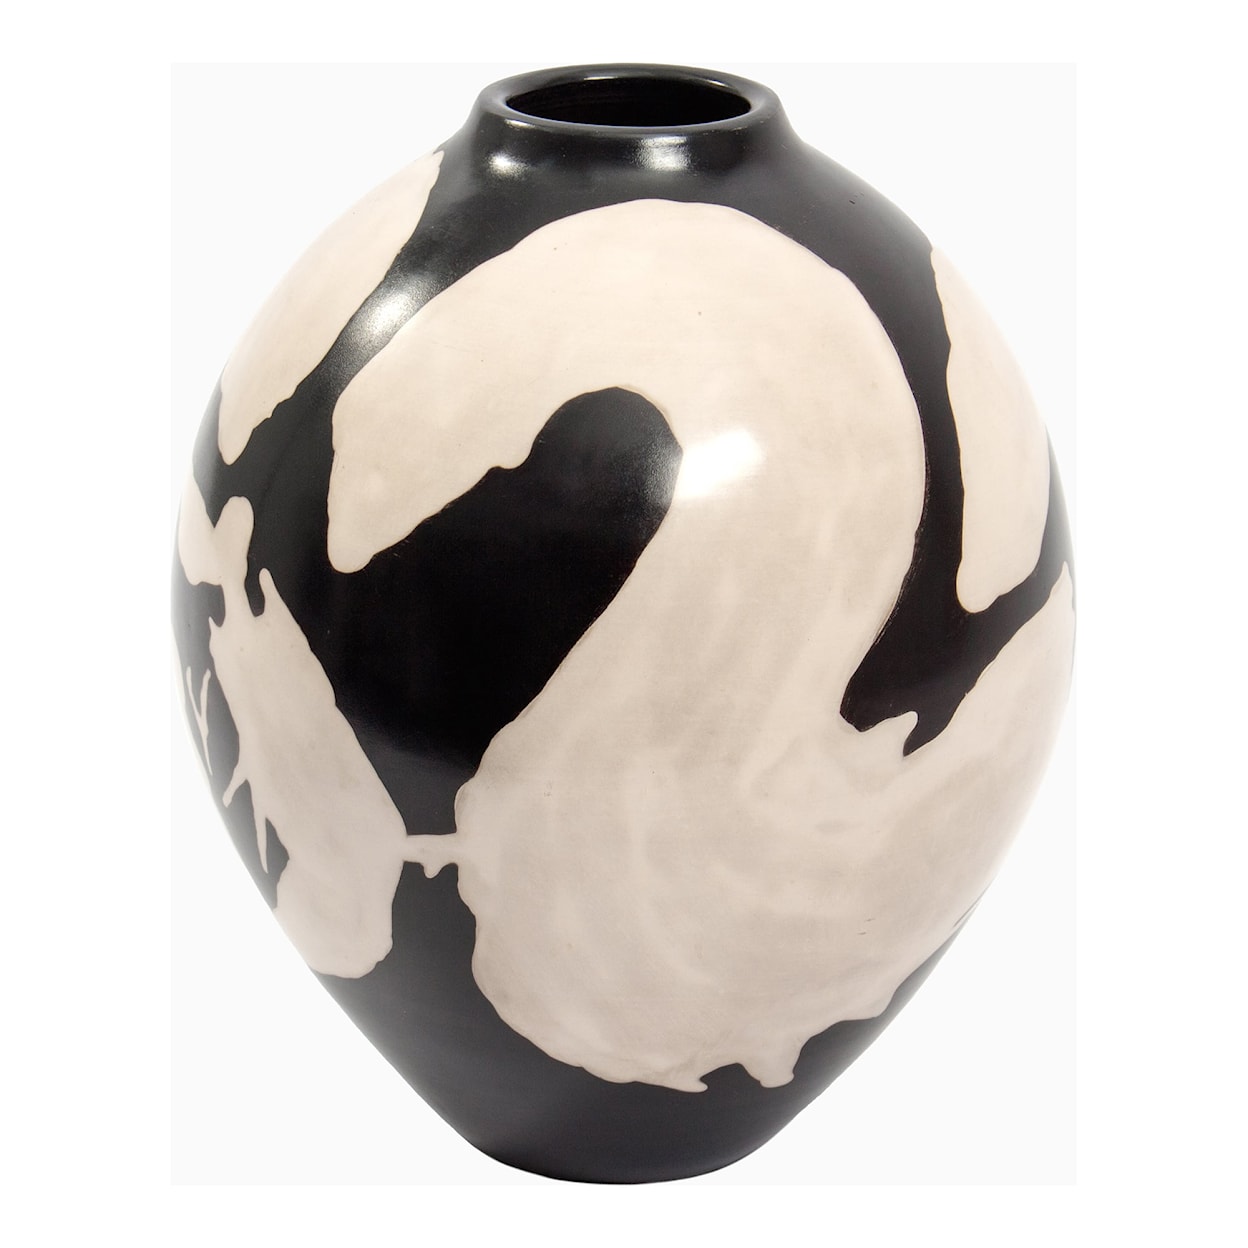 Moe's Home Collection Chulu Terracotta Vase